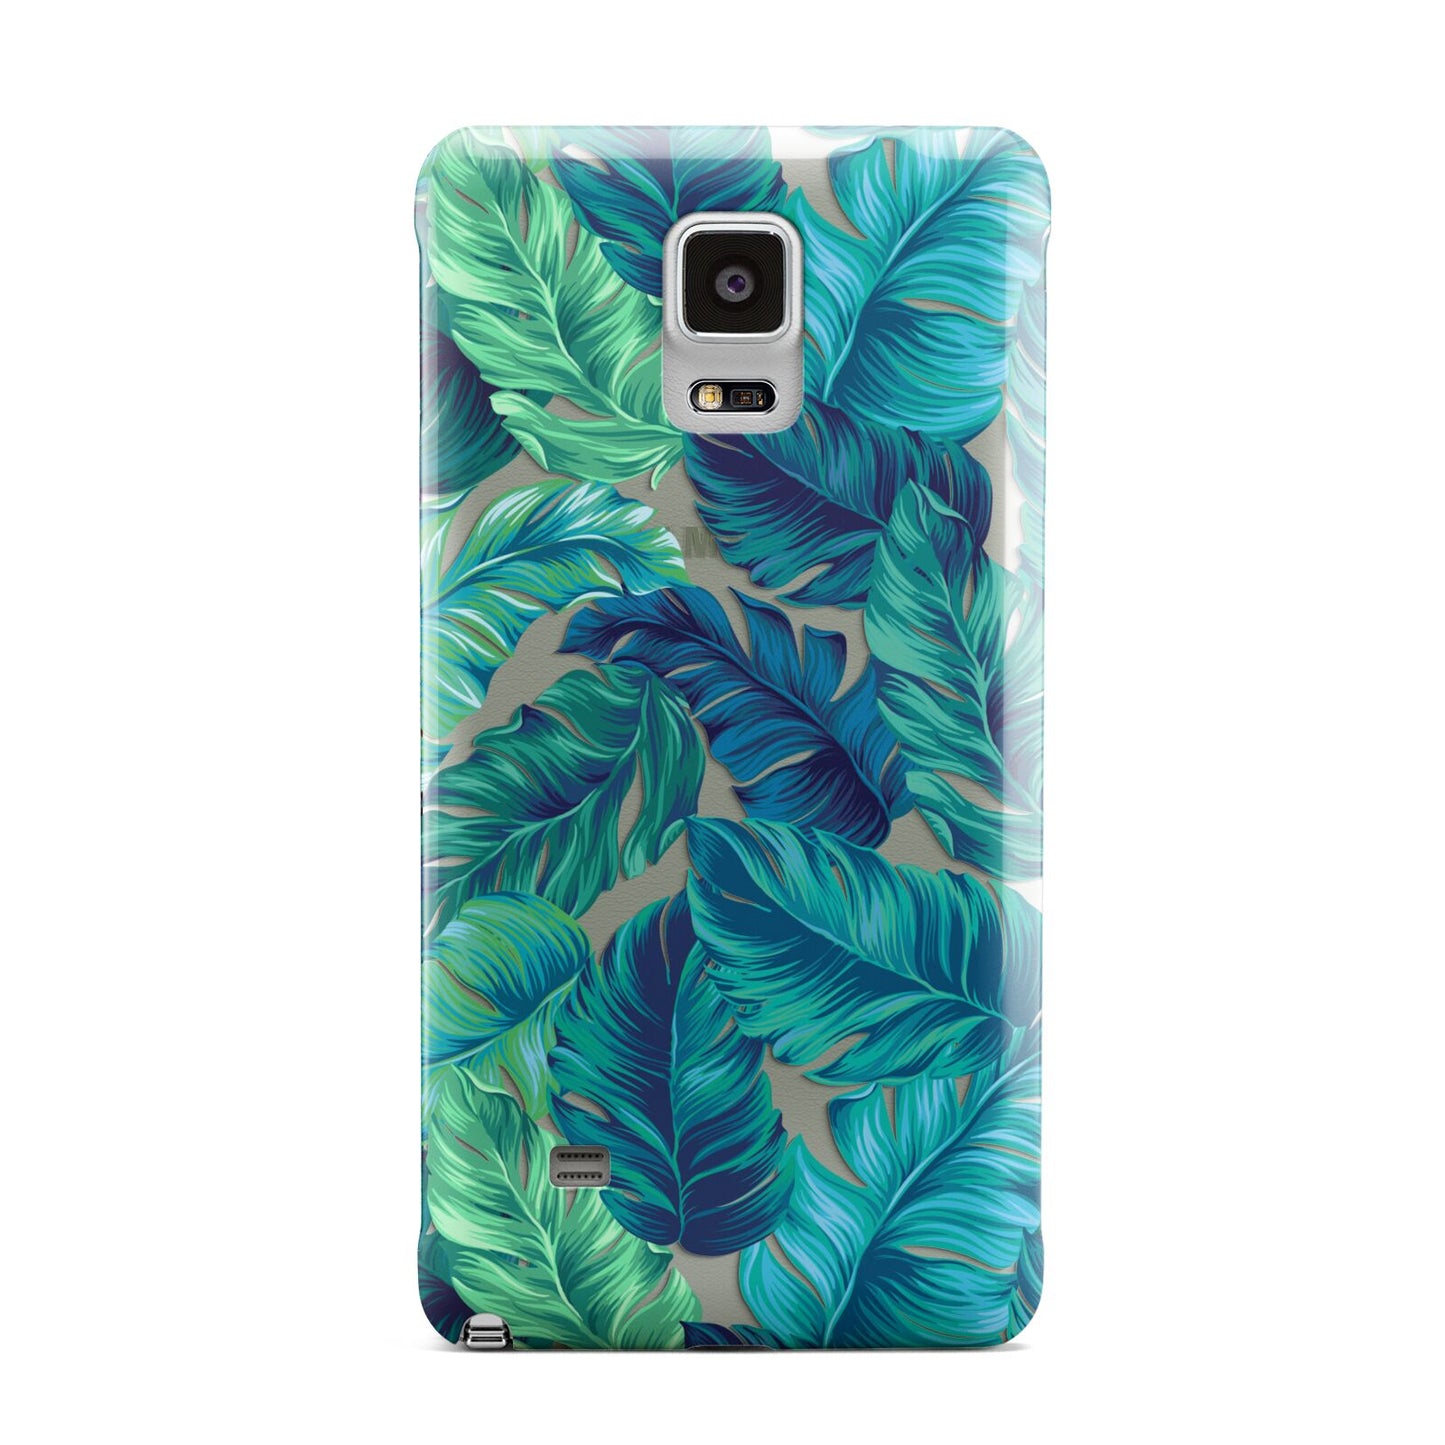 Tropical Leaves Samsung Galaxy Note 4 Case